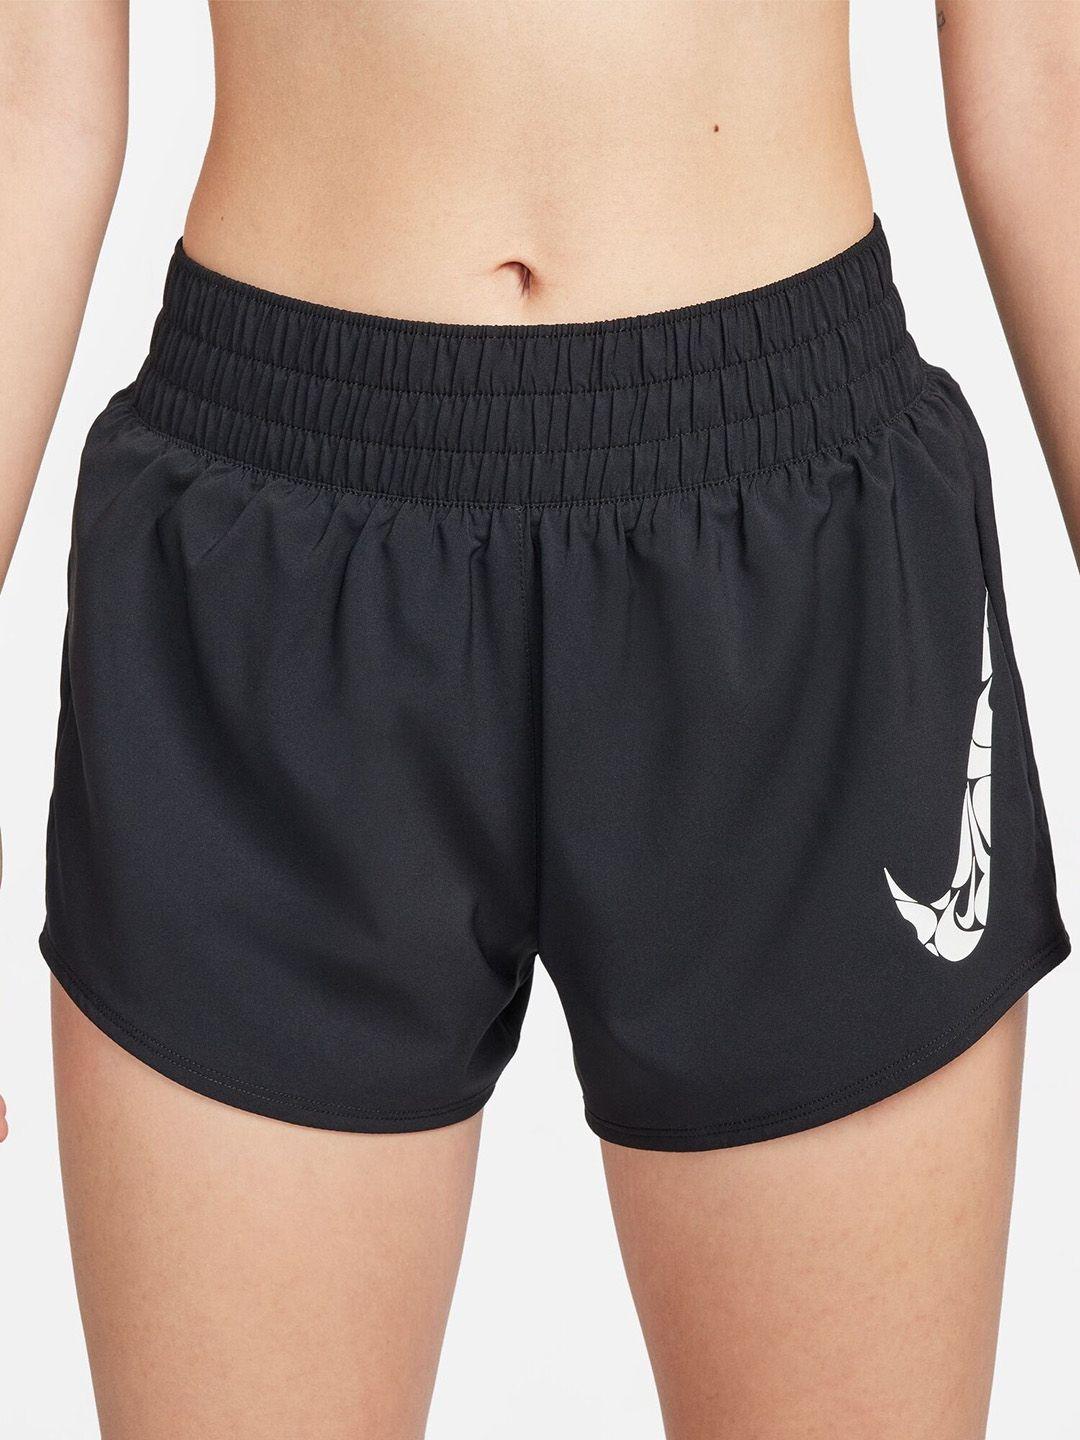 nike one women dri-fit mid-rise 8cm brief-lined shorts